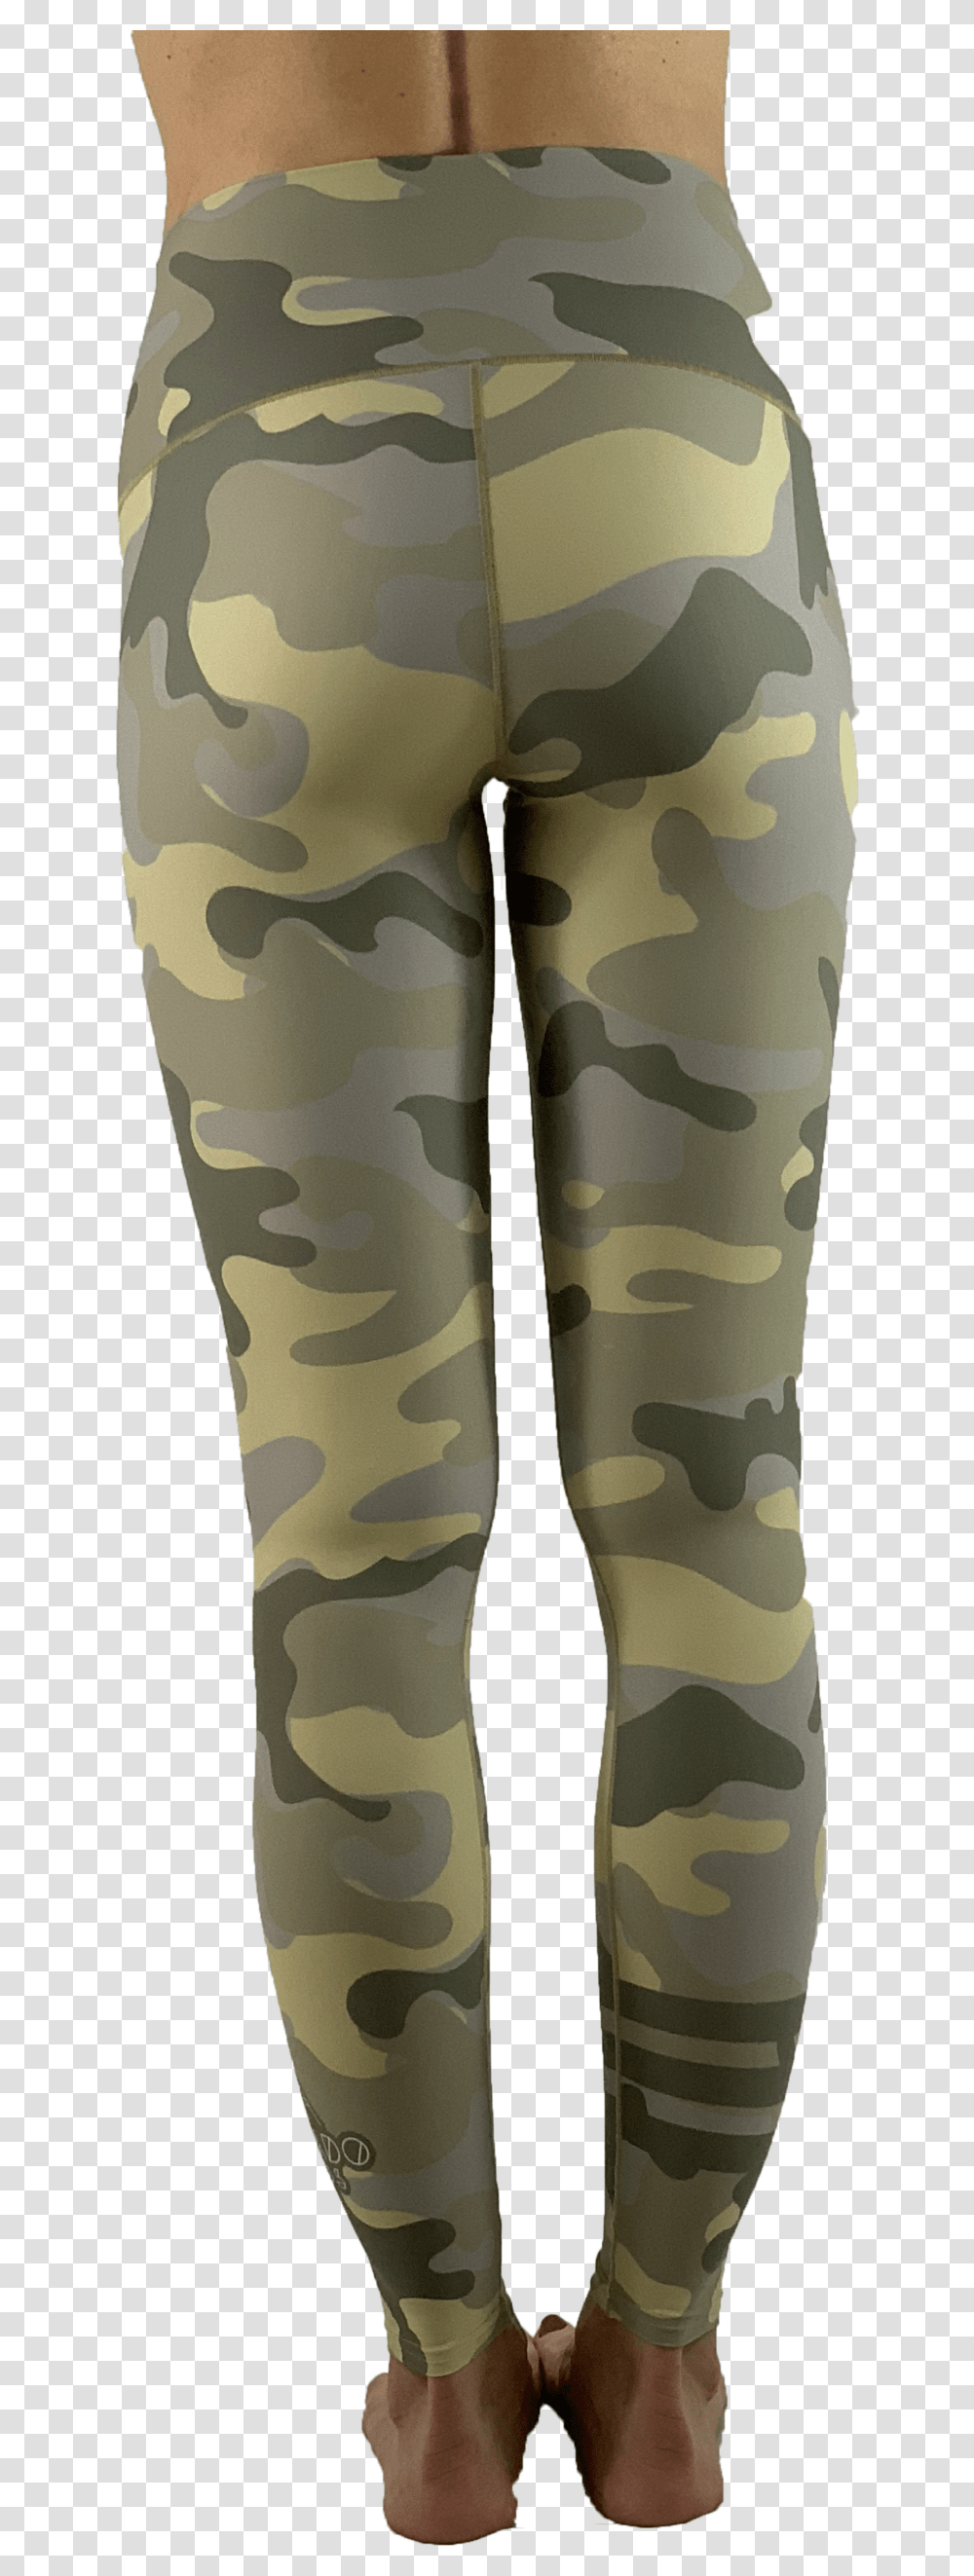 Sand Camo Yoga PantsClass Lazyload Lazyload Fade Tights, Camouflage, Military Uniform Transparent Png